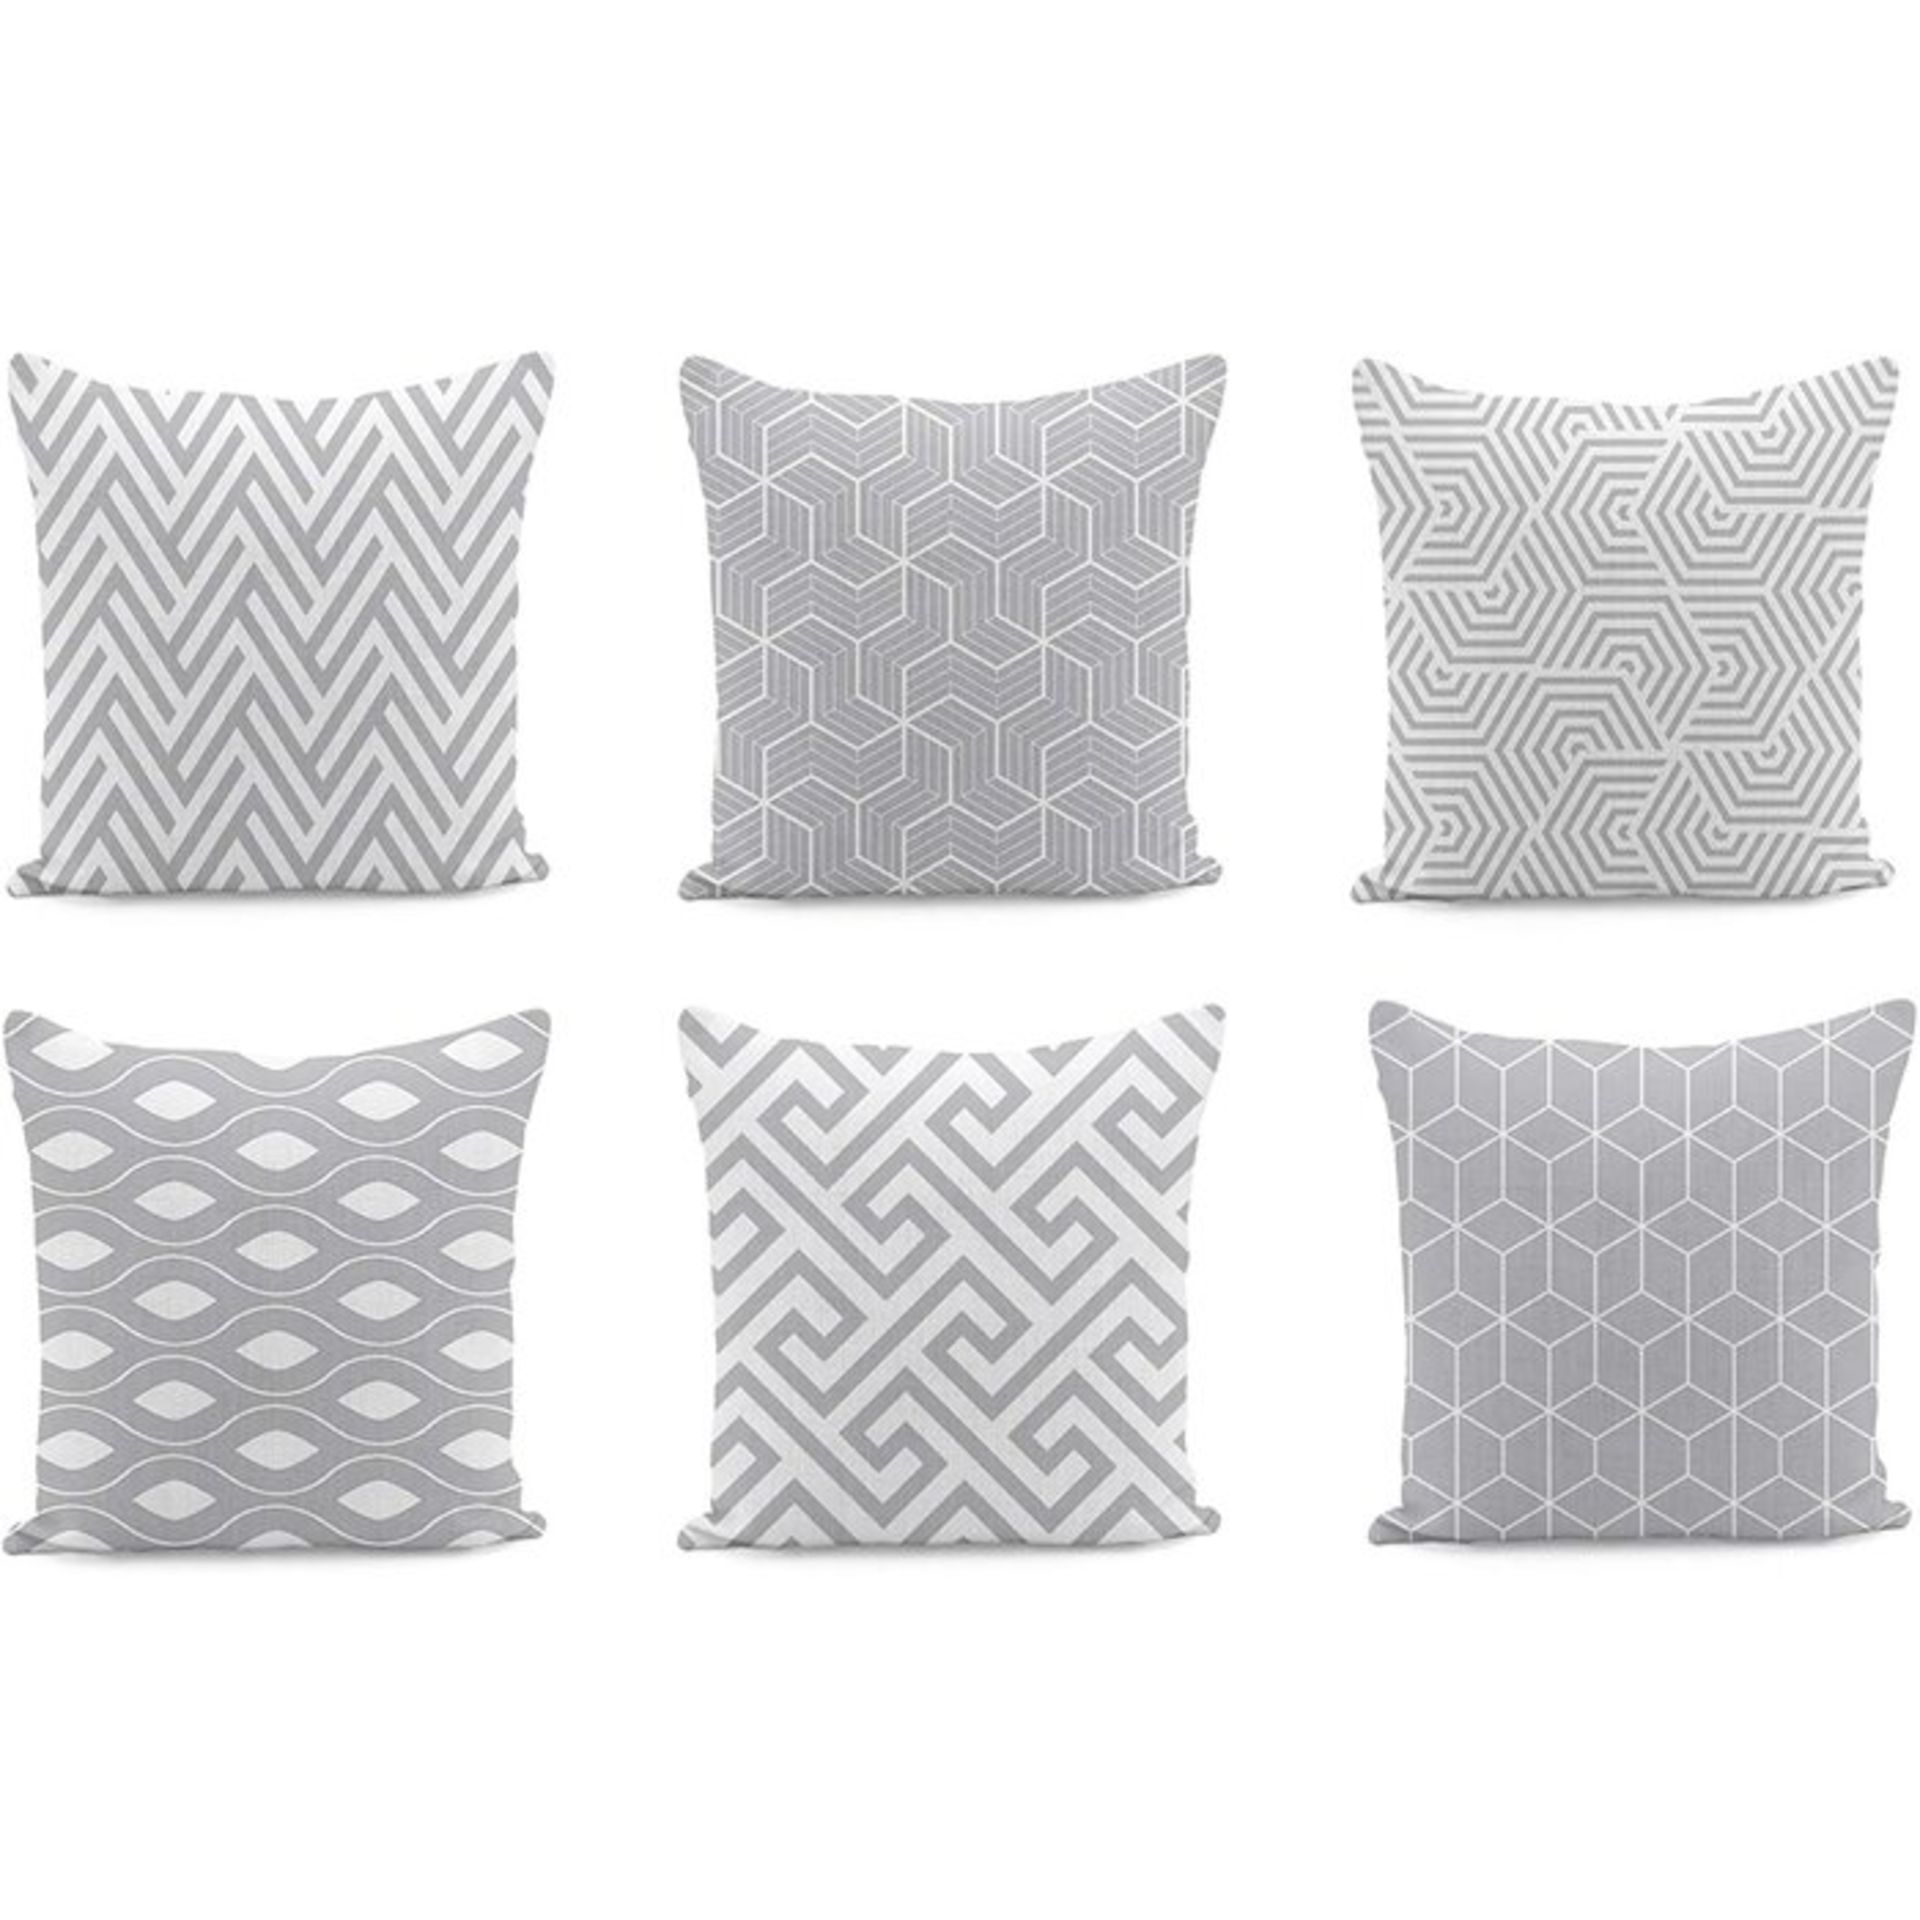 Aelia Cushion Cover (Set of 6) - RRP £35.99 COVER ONLY